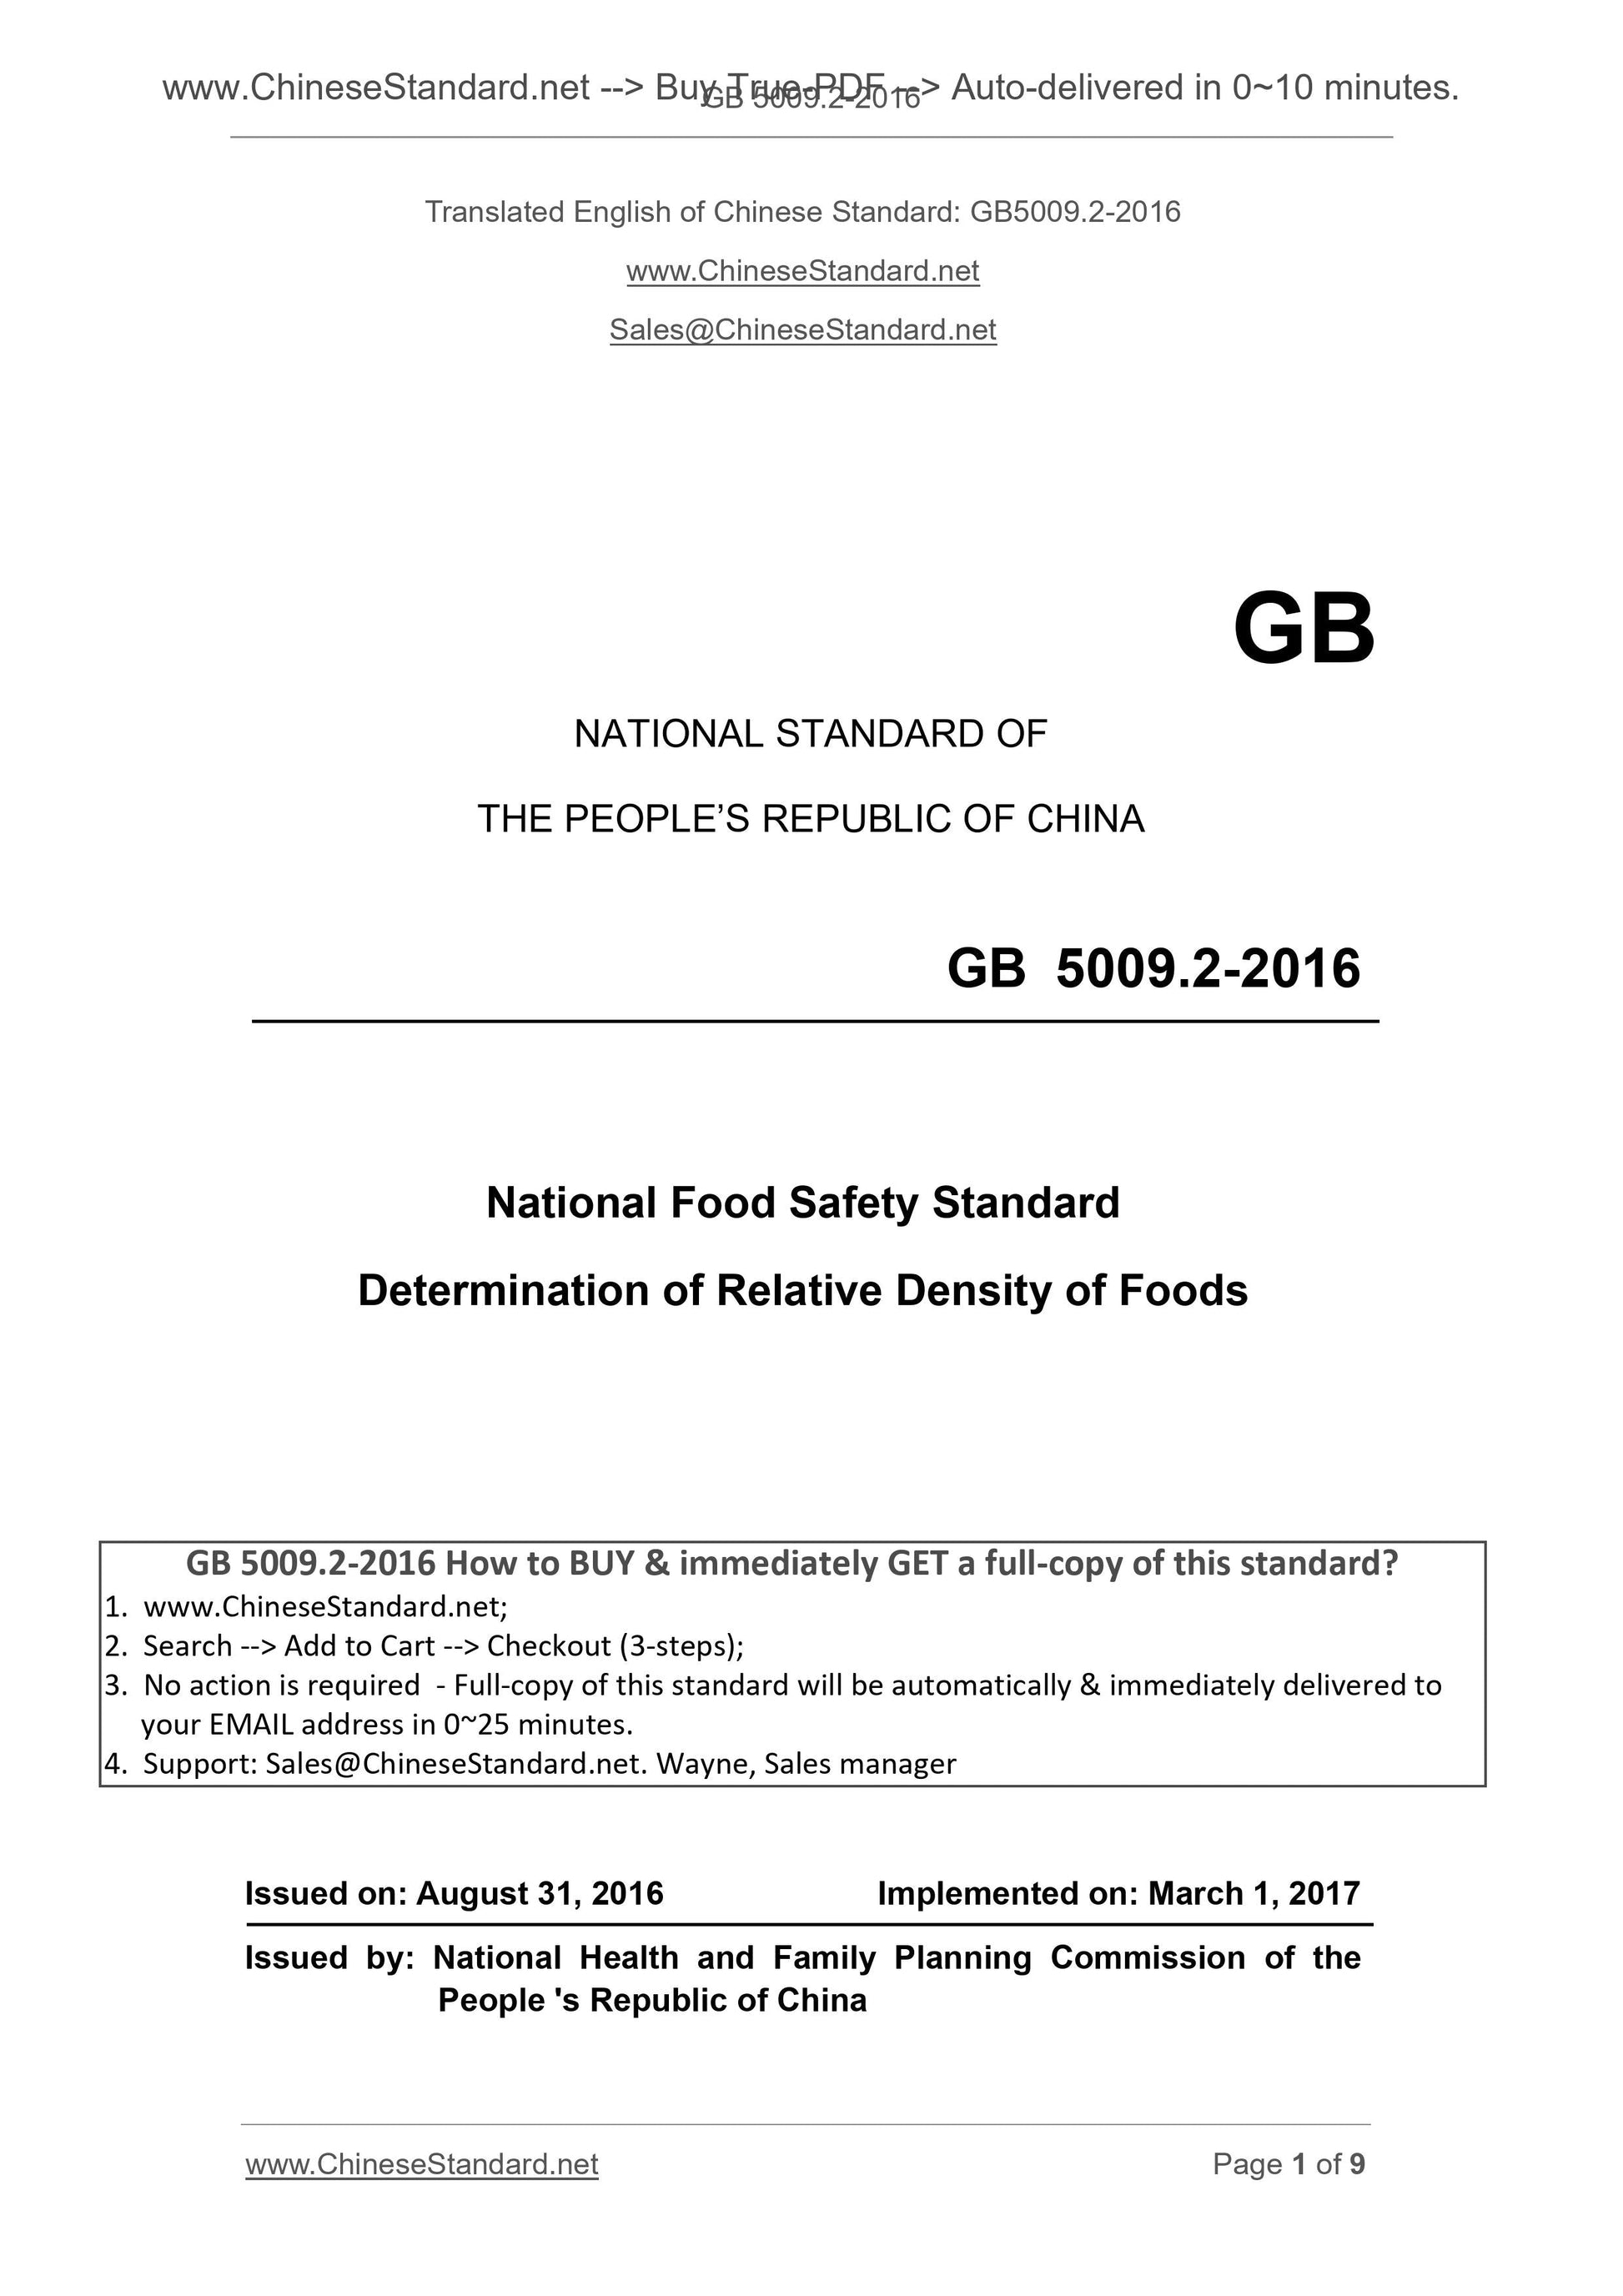 GB 5009.2-2016 Page 1